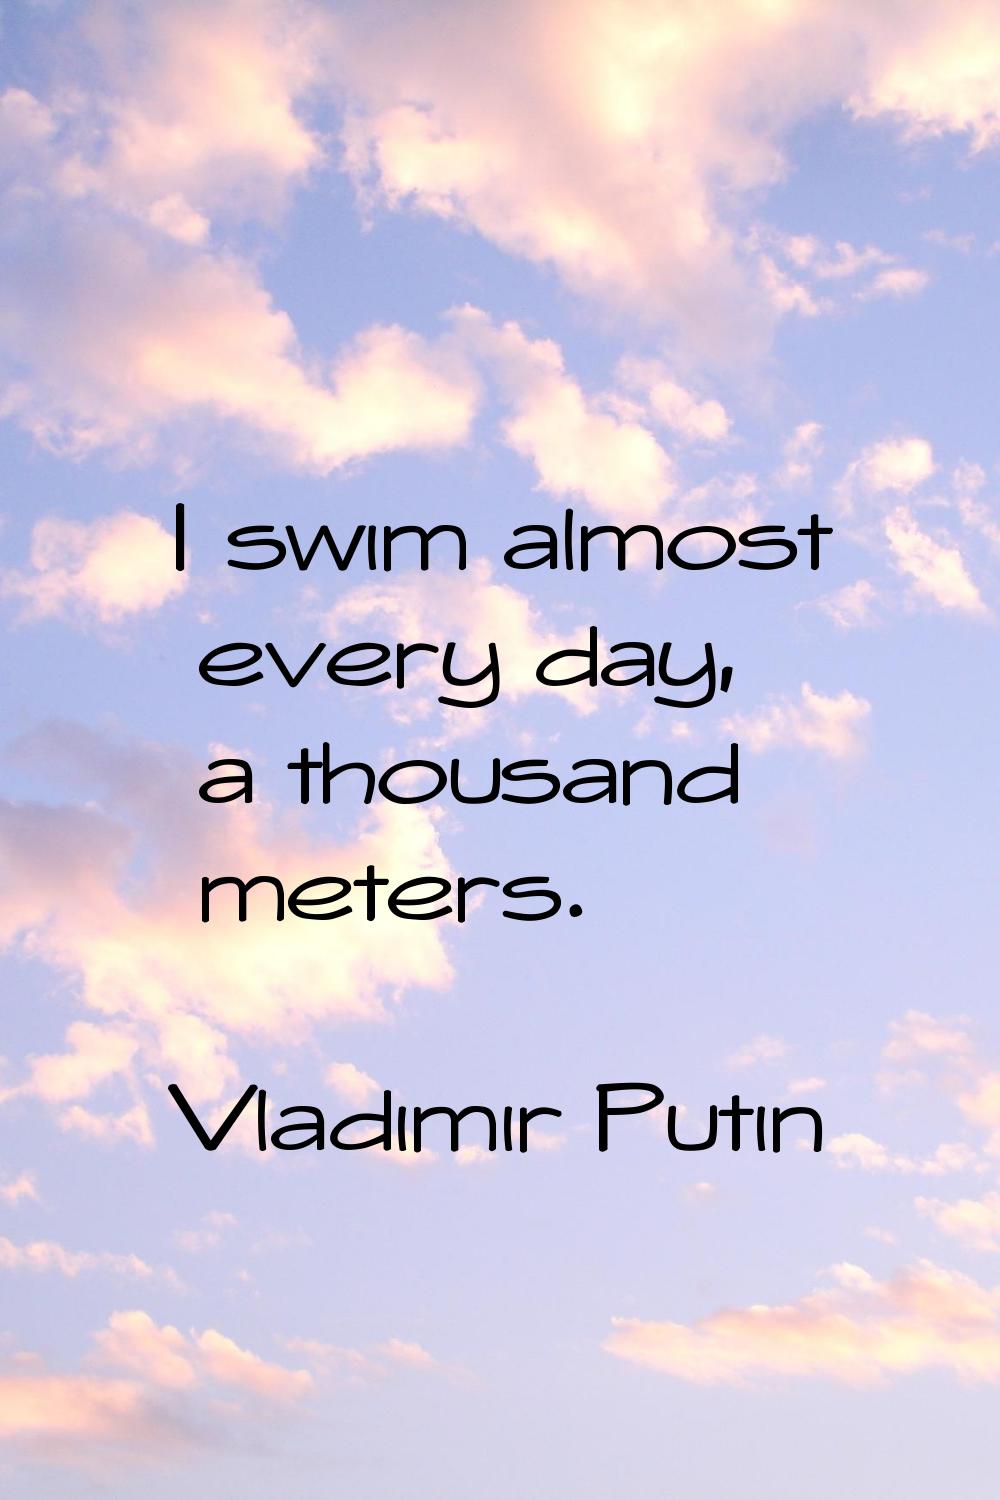 I swim almost every day, a thousand meters.